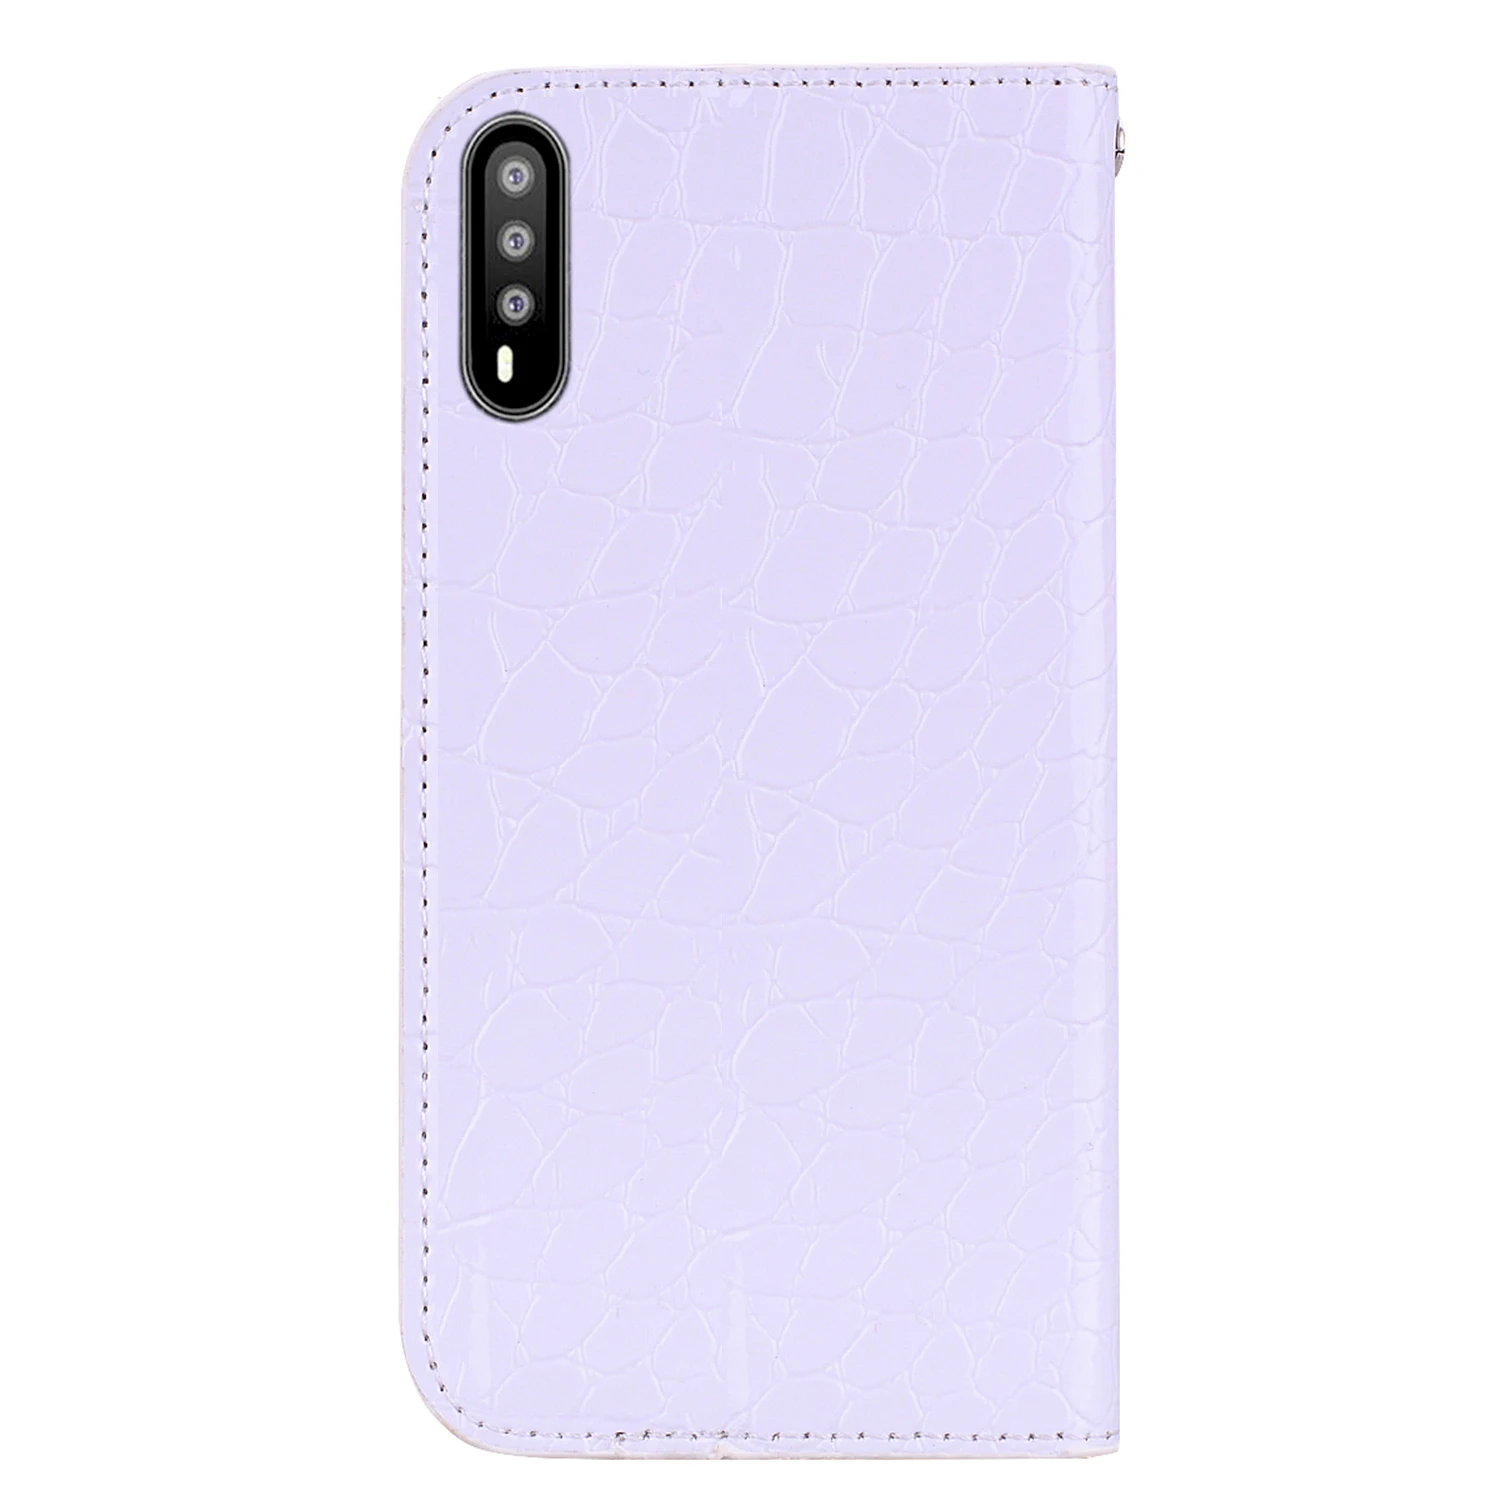 Glitter Bling Case For Huawei Mate 10 20 P20 P30 Lite Pro Honor 10 9 Lite 7x Y6 Y7 Y9 P Smart+ Leather Flip Book Case Coque